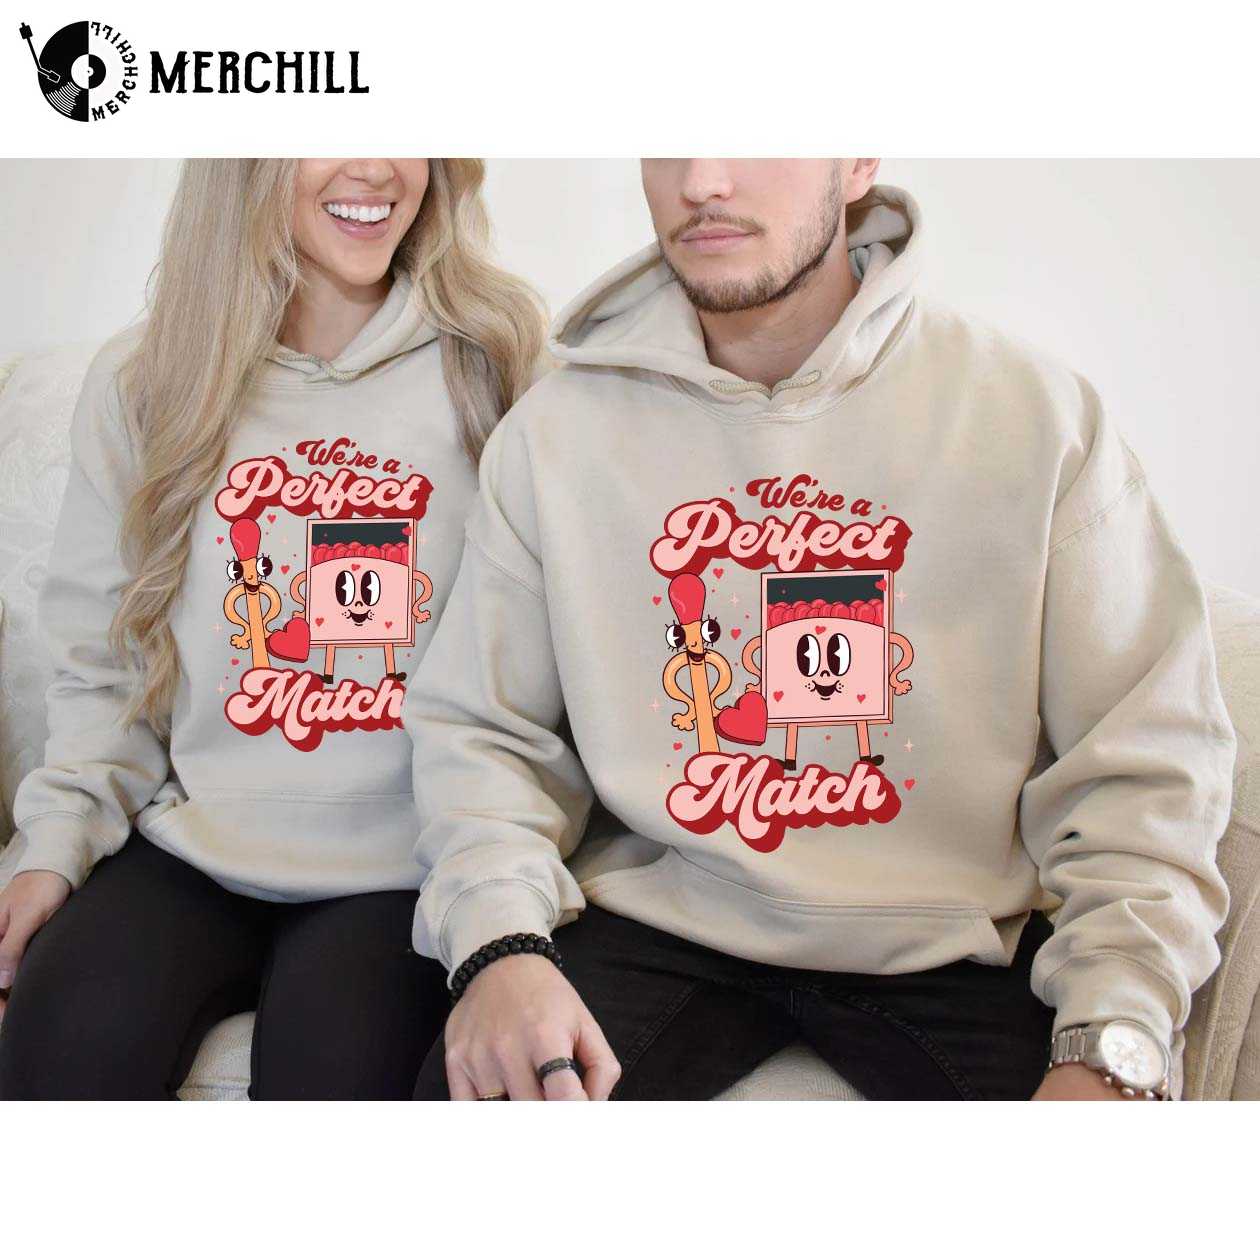 We're a Perfect Match His and Her Valentine Shirts Valentines Day Ideas for  Couples - Happy Place for Music Lovers